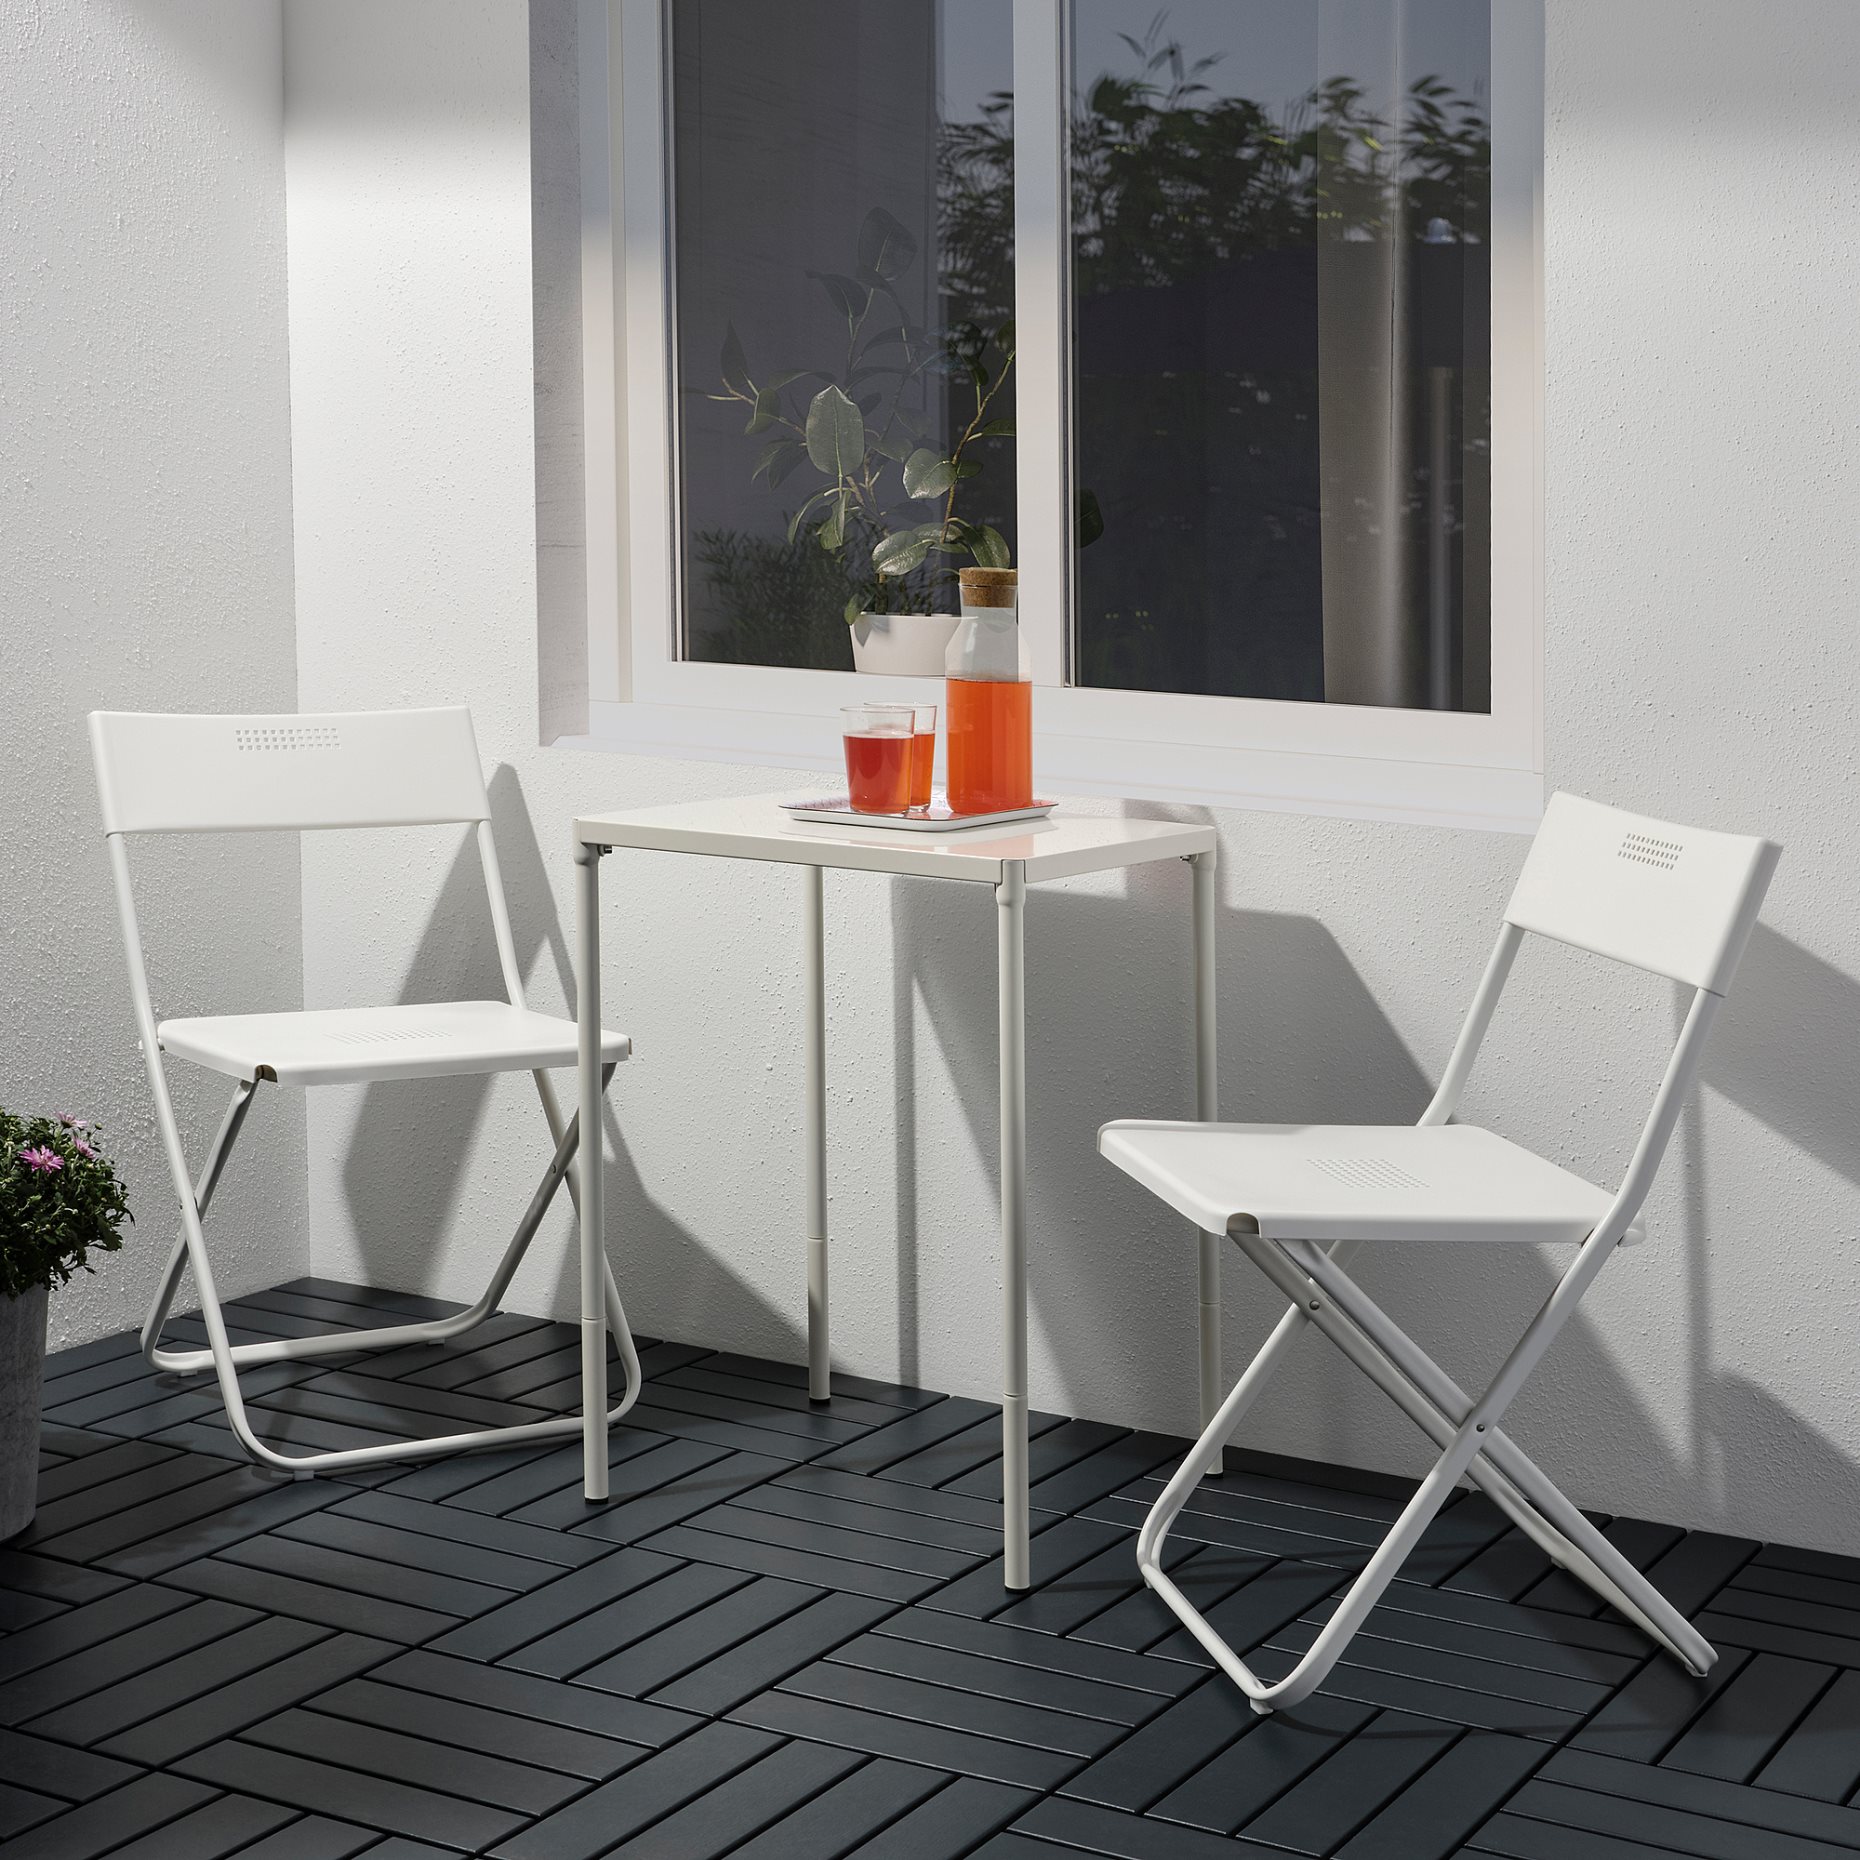 FEJAN, table and 2 folding chairs, outdoor, 594.349.49